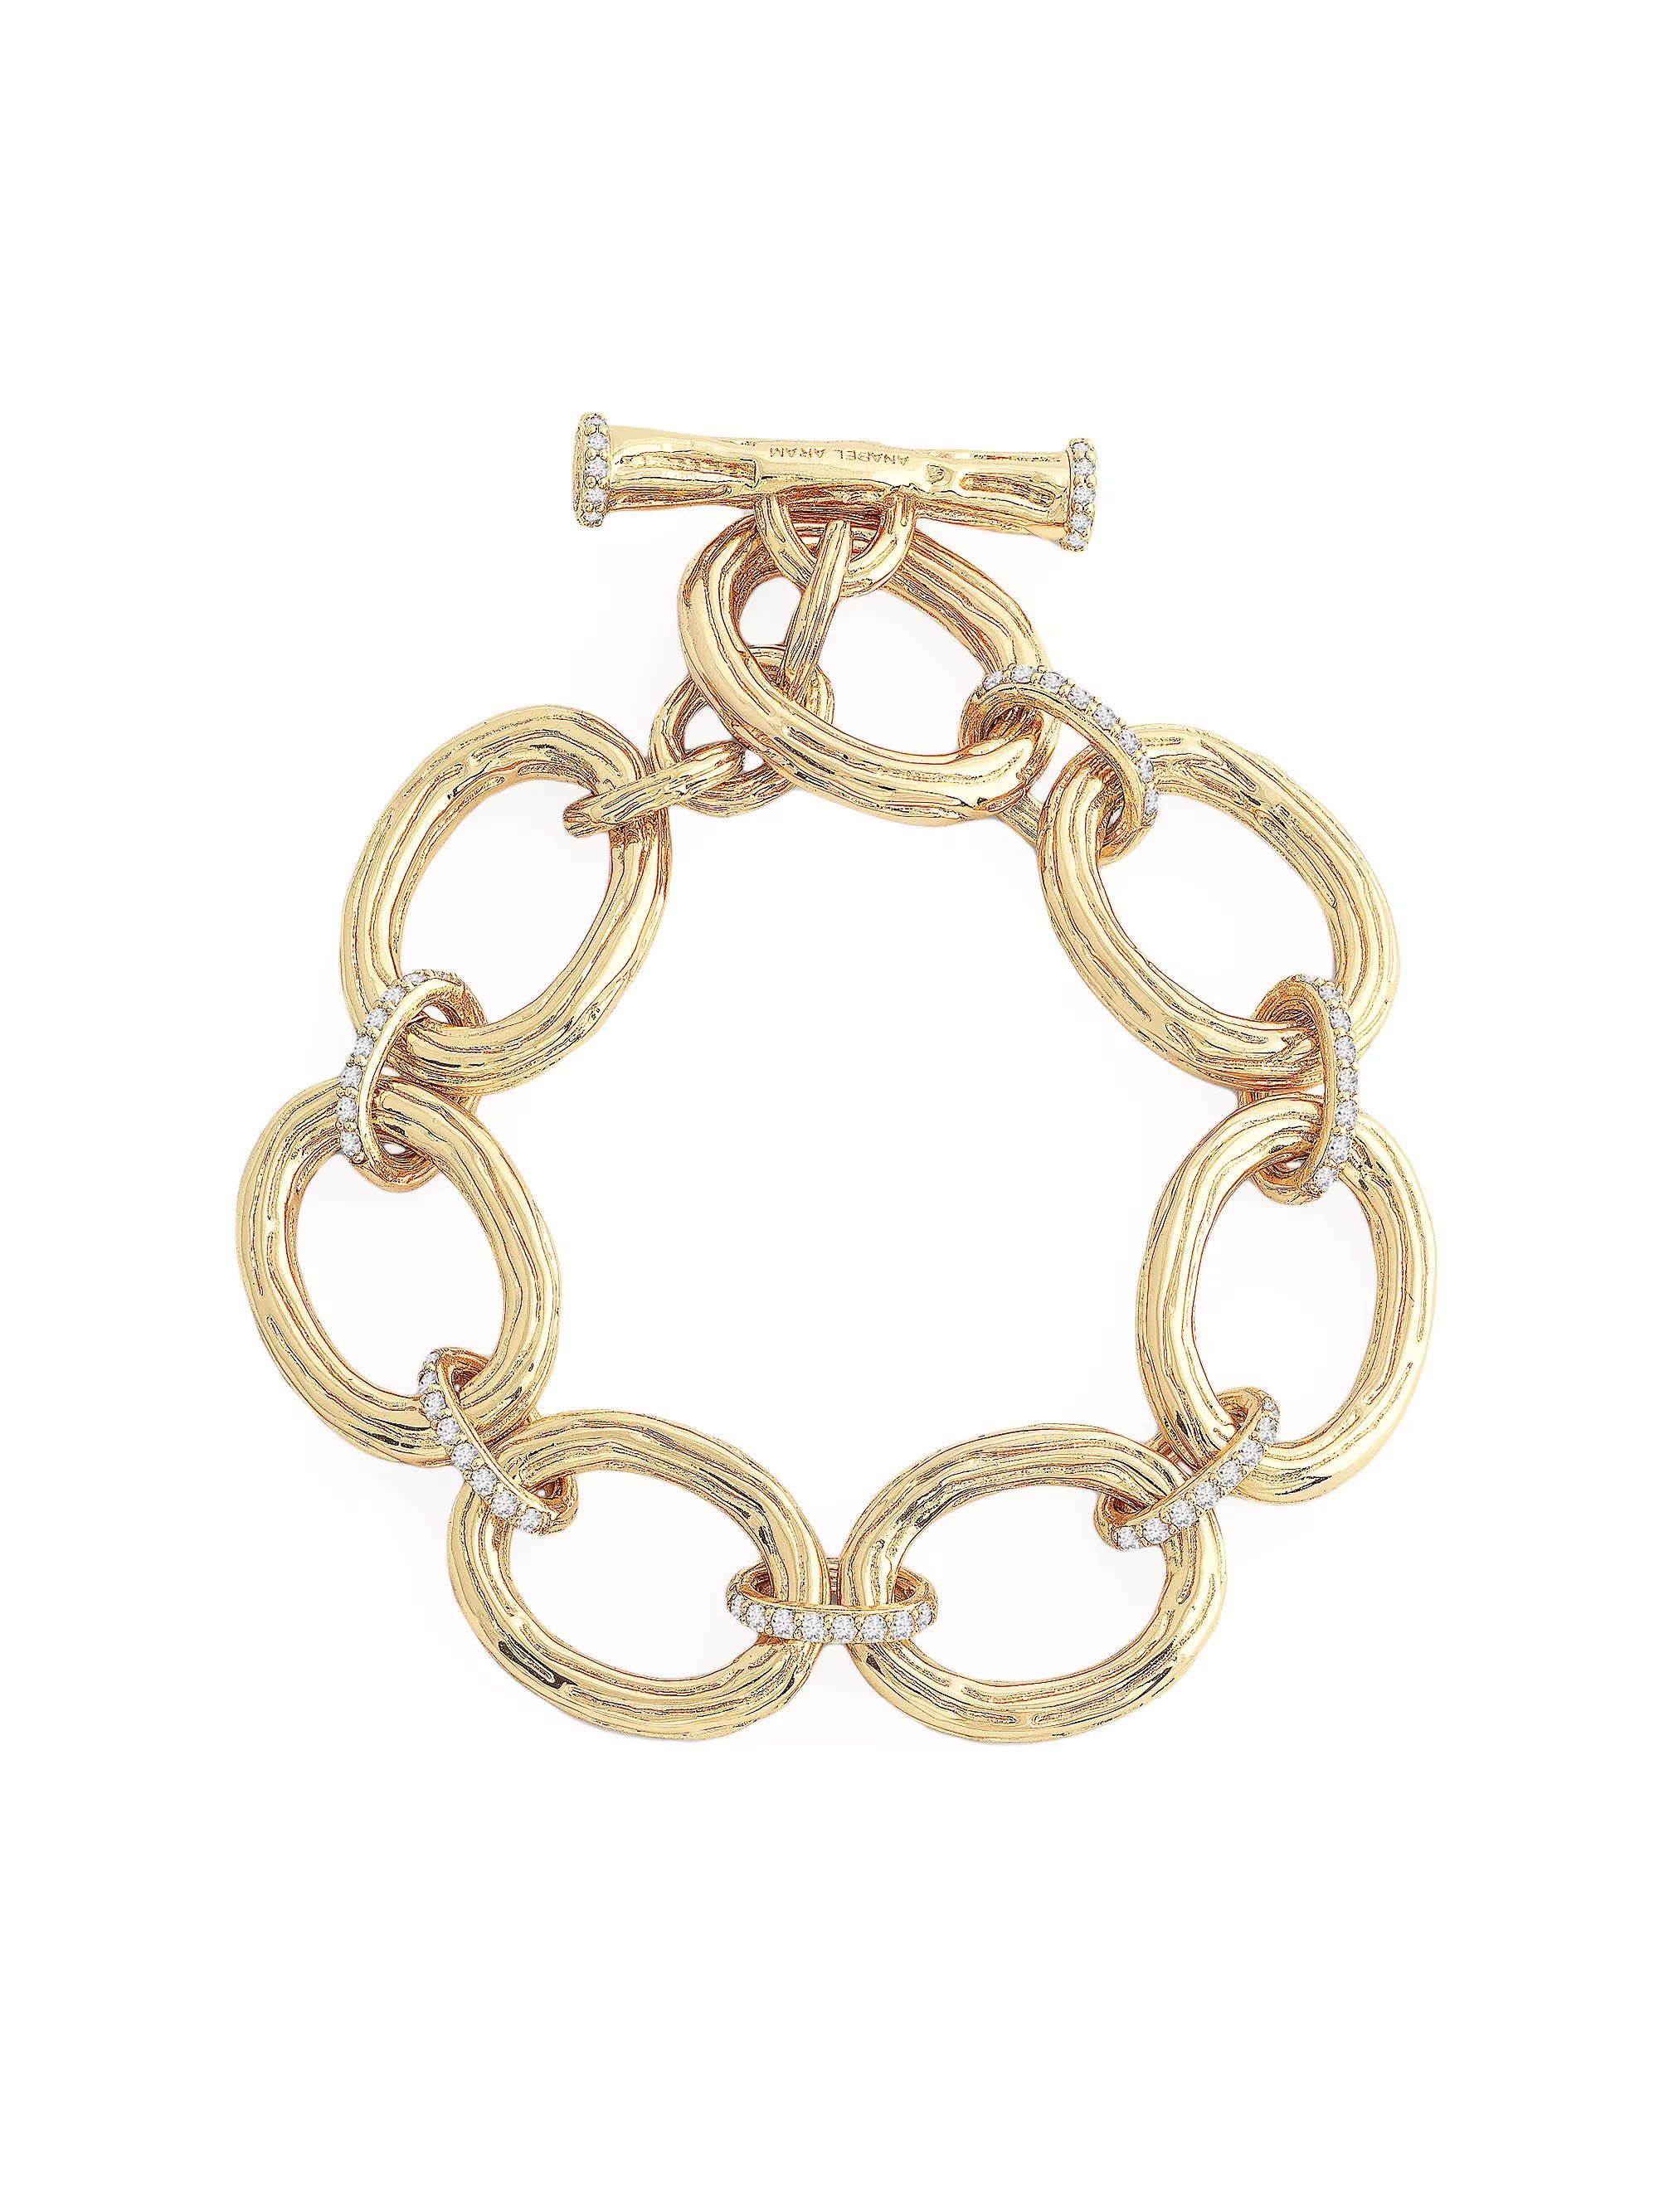 Enchanted Forest 18K Gold-Plated & Cubic Zirconia Chain Bracelet | Saks Fifth Avenue